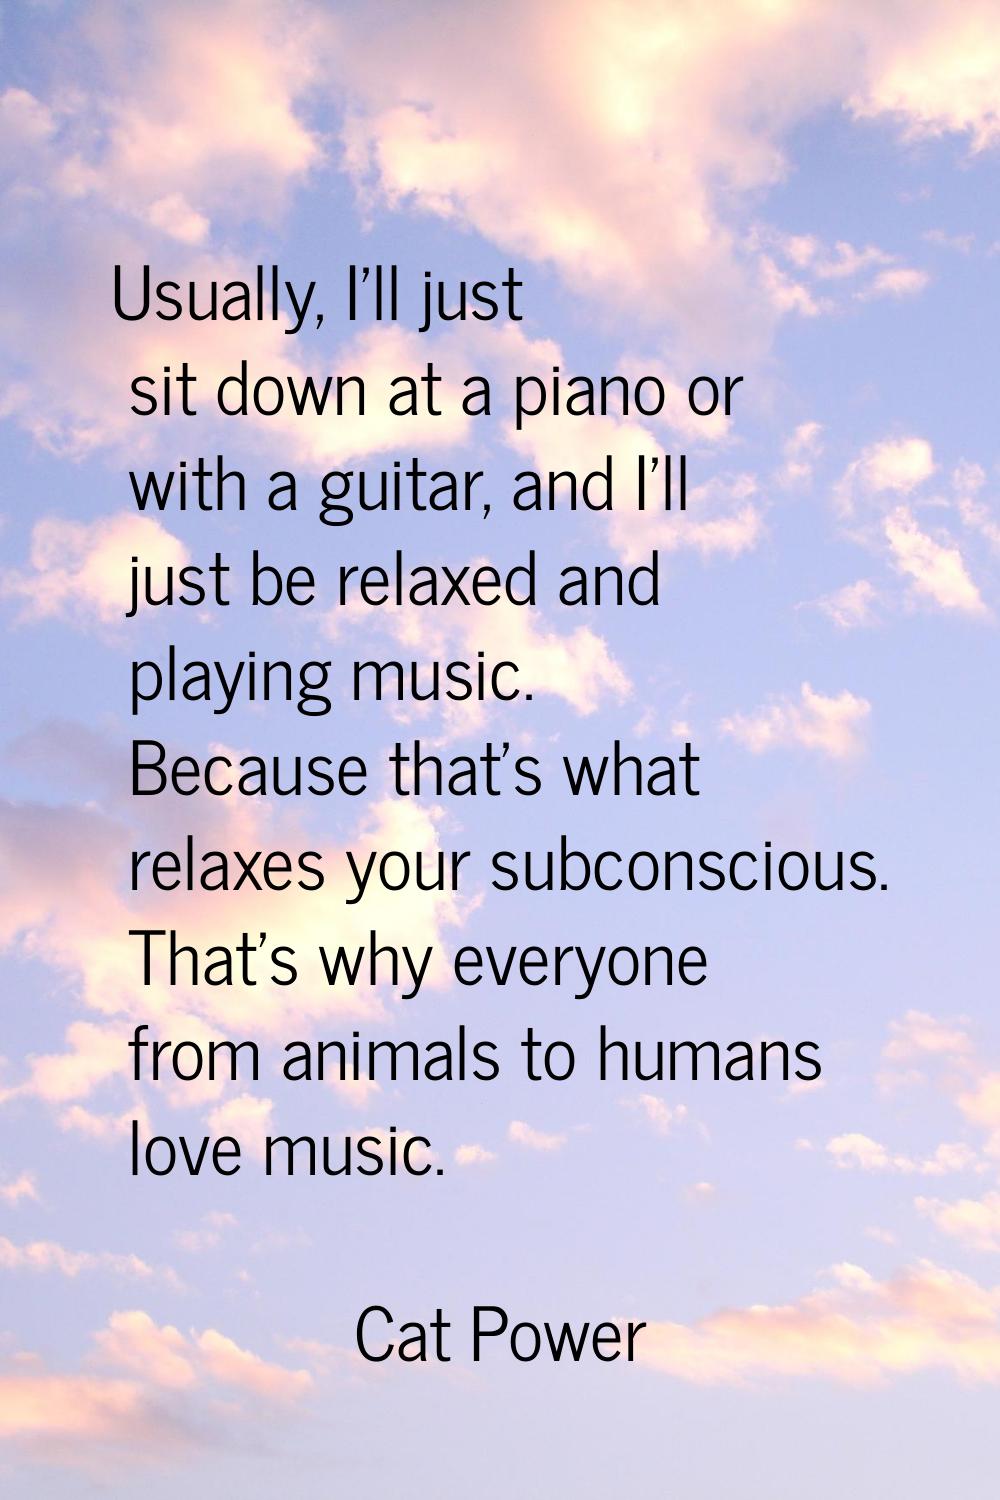 Usually, I'll just sit down at a piano or with a guitar, and I'll just be relaxed and playing music